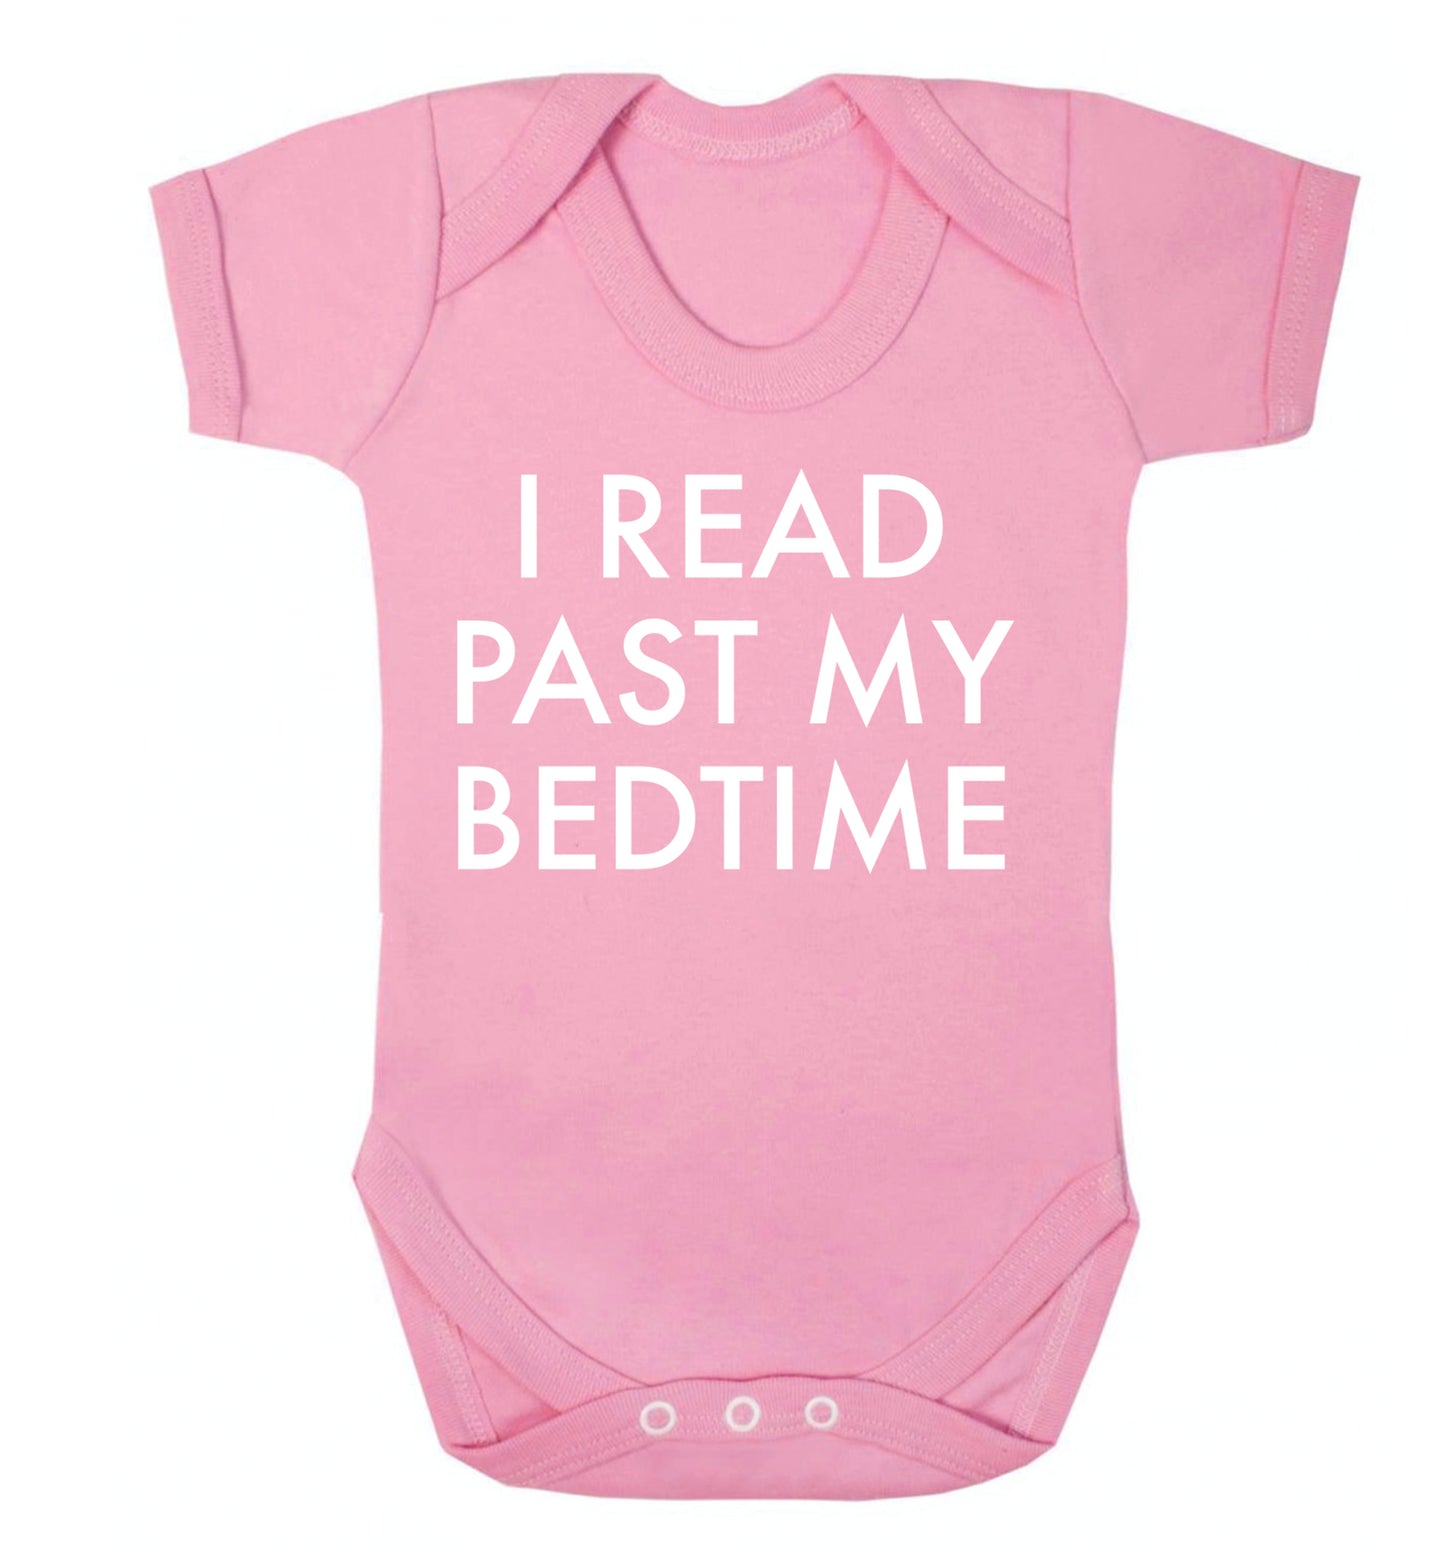 I read past my bedtime Baby Vest pale pink 18-24 months